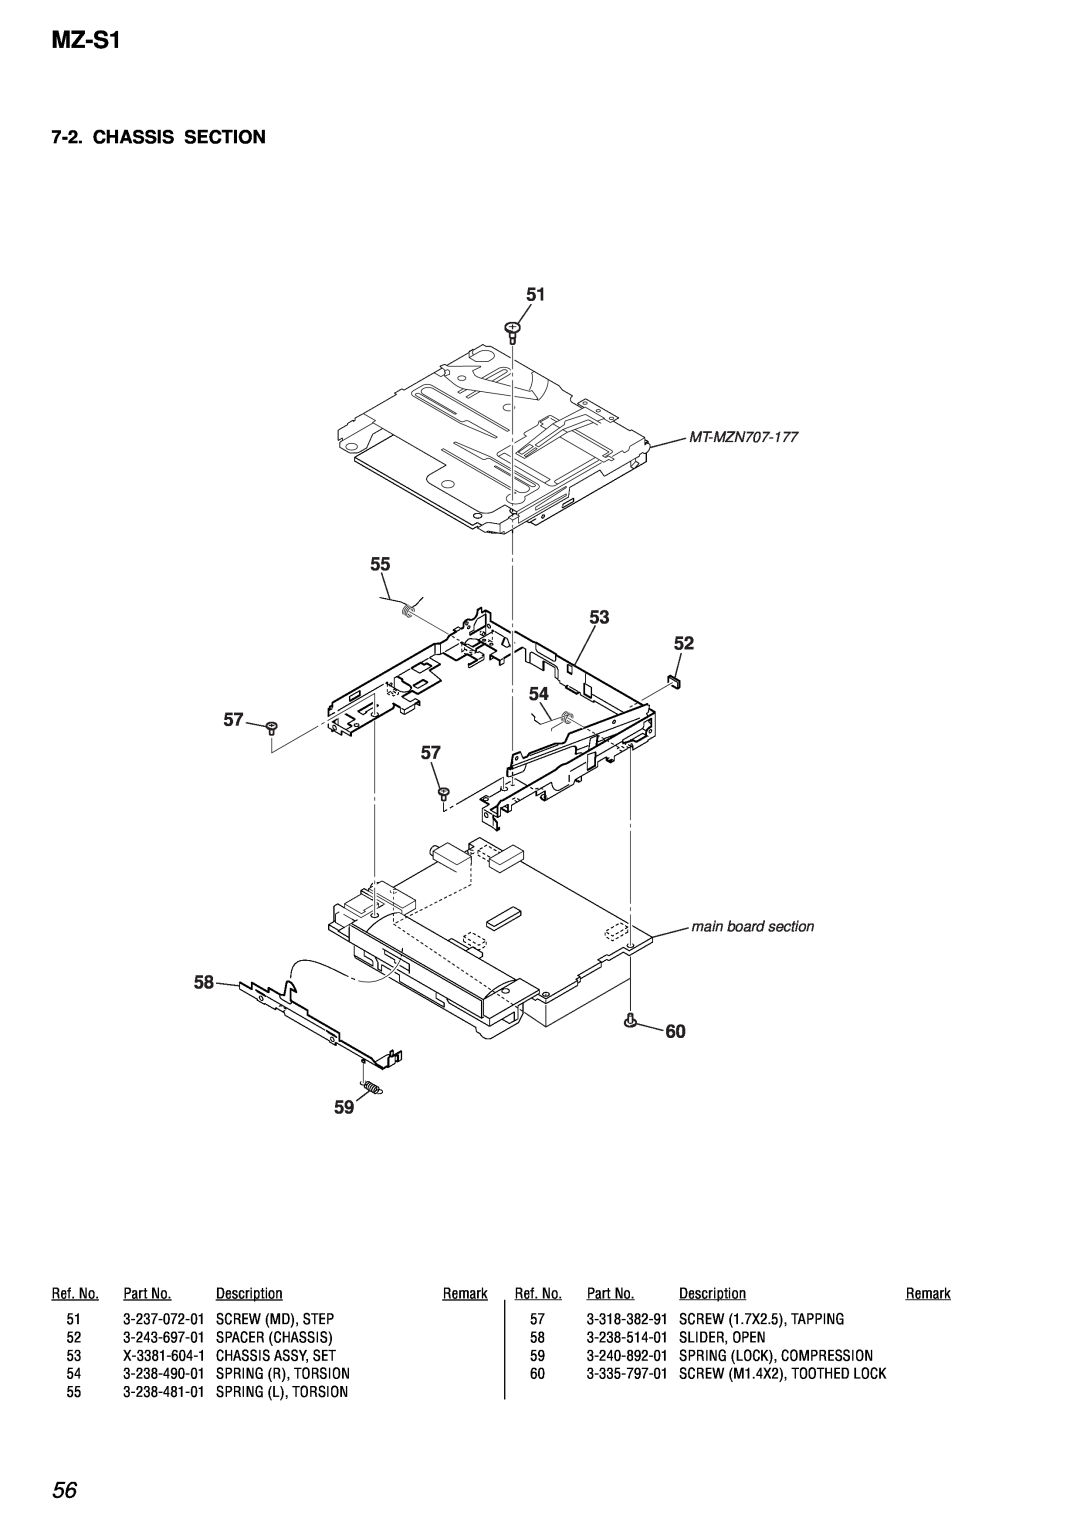 Sony MZ-S1 service manual Chassis Section 